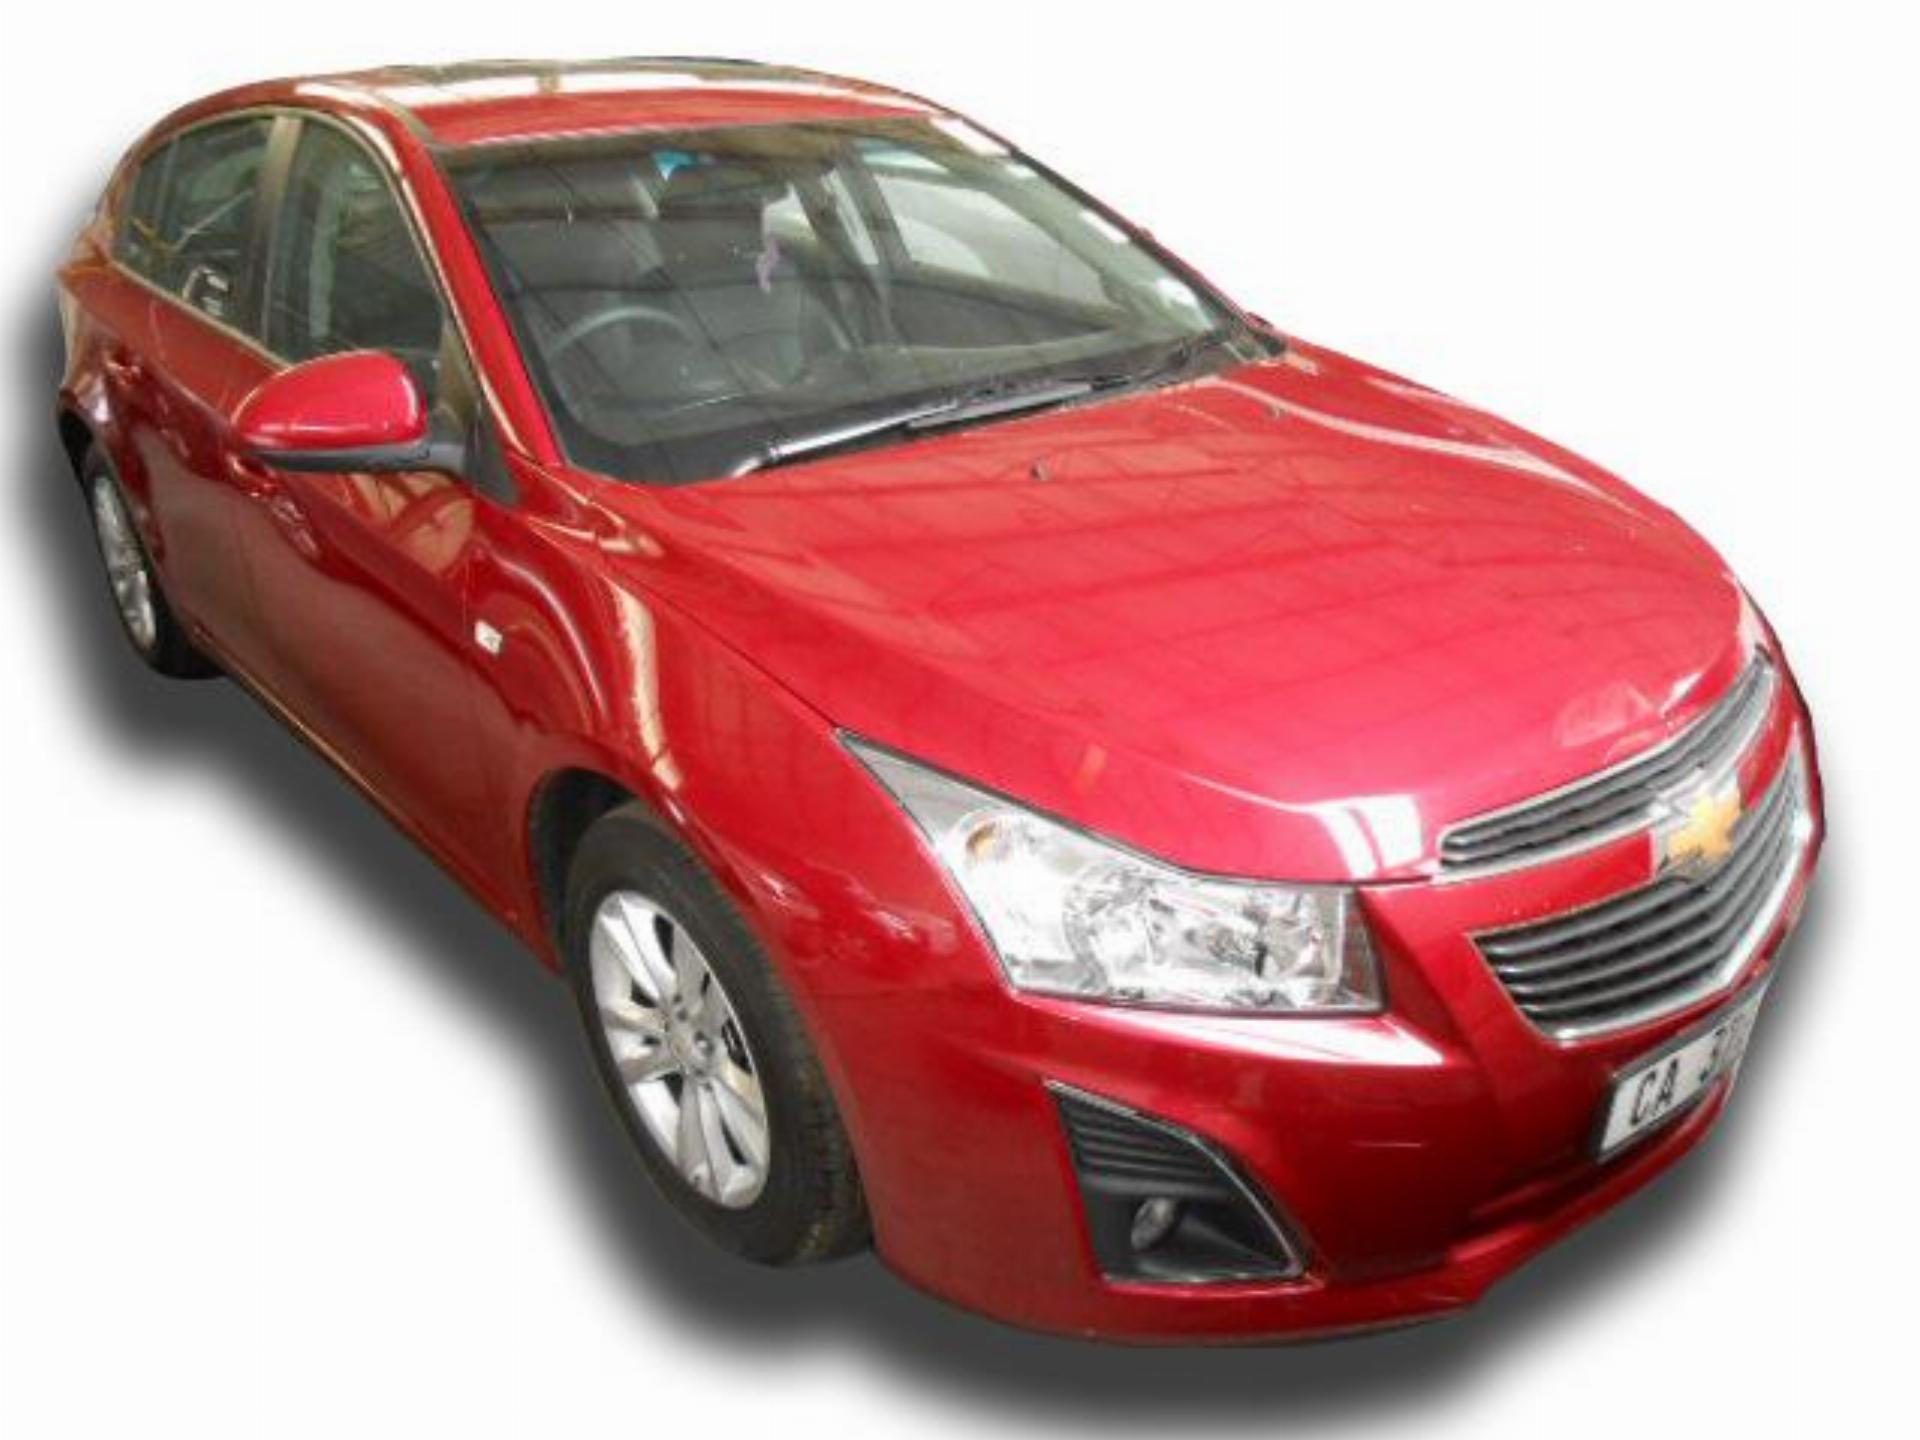 Repossessed Chevrolet Cruze 1.6 LS 5DR 2013 on auction